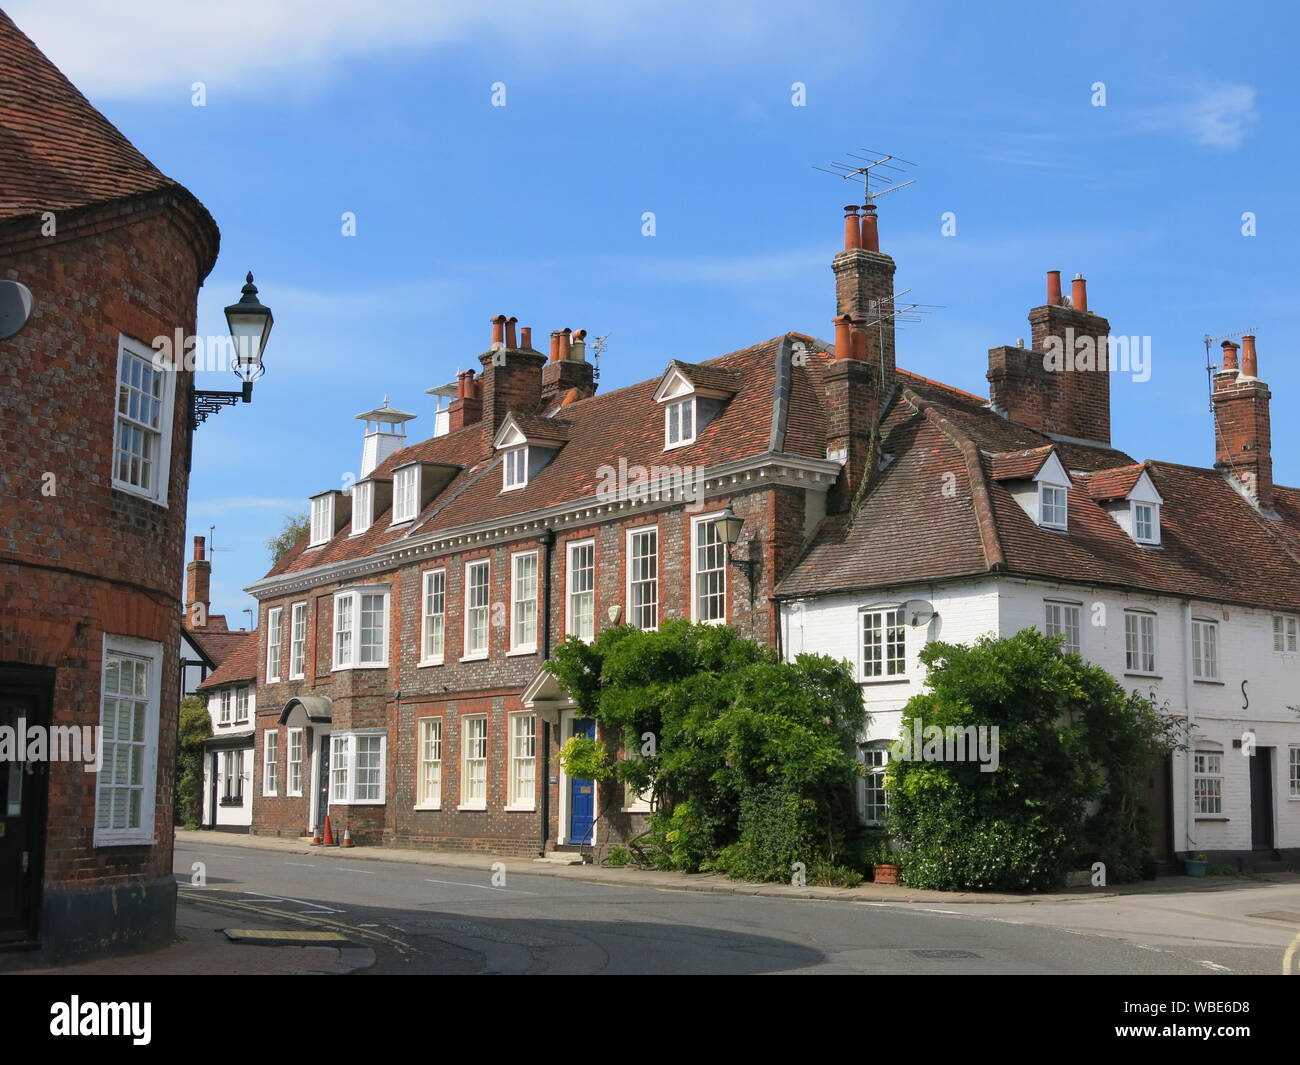 A street corner in the centre of the market town of Henley-on-Thames with its attractive architecture and row of three-storey buildings. Stock Photo